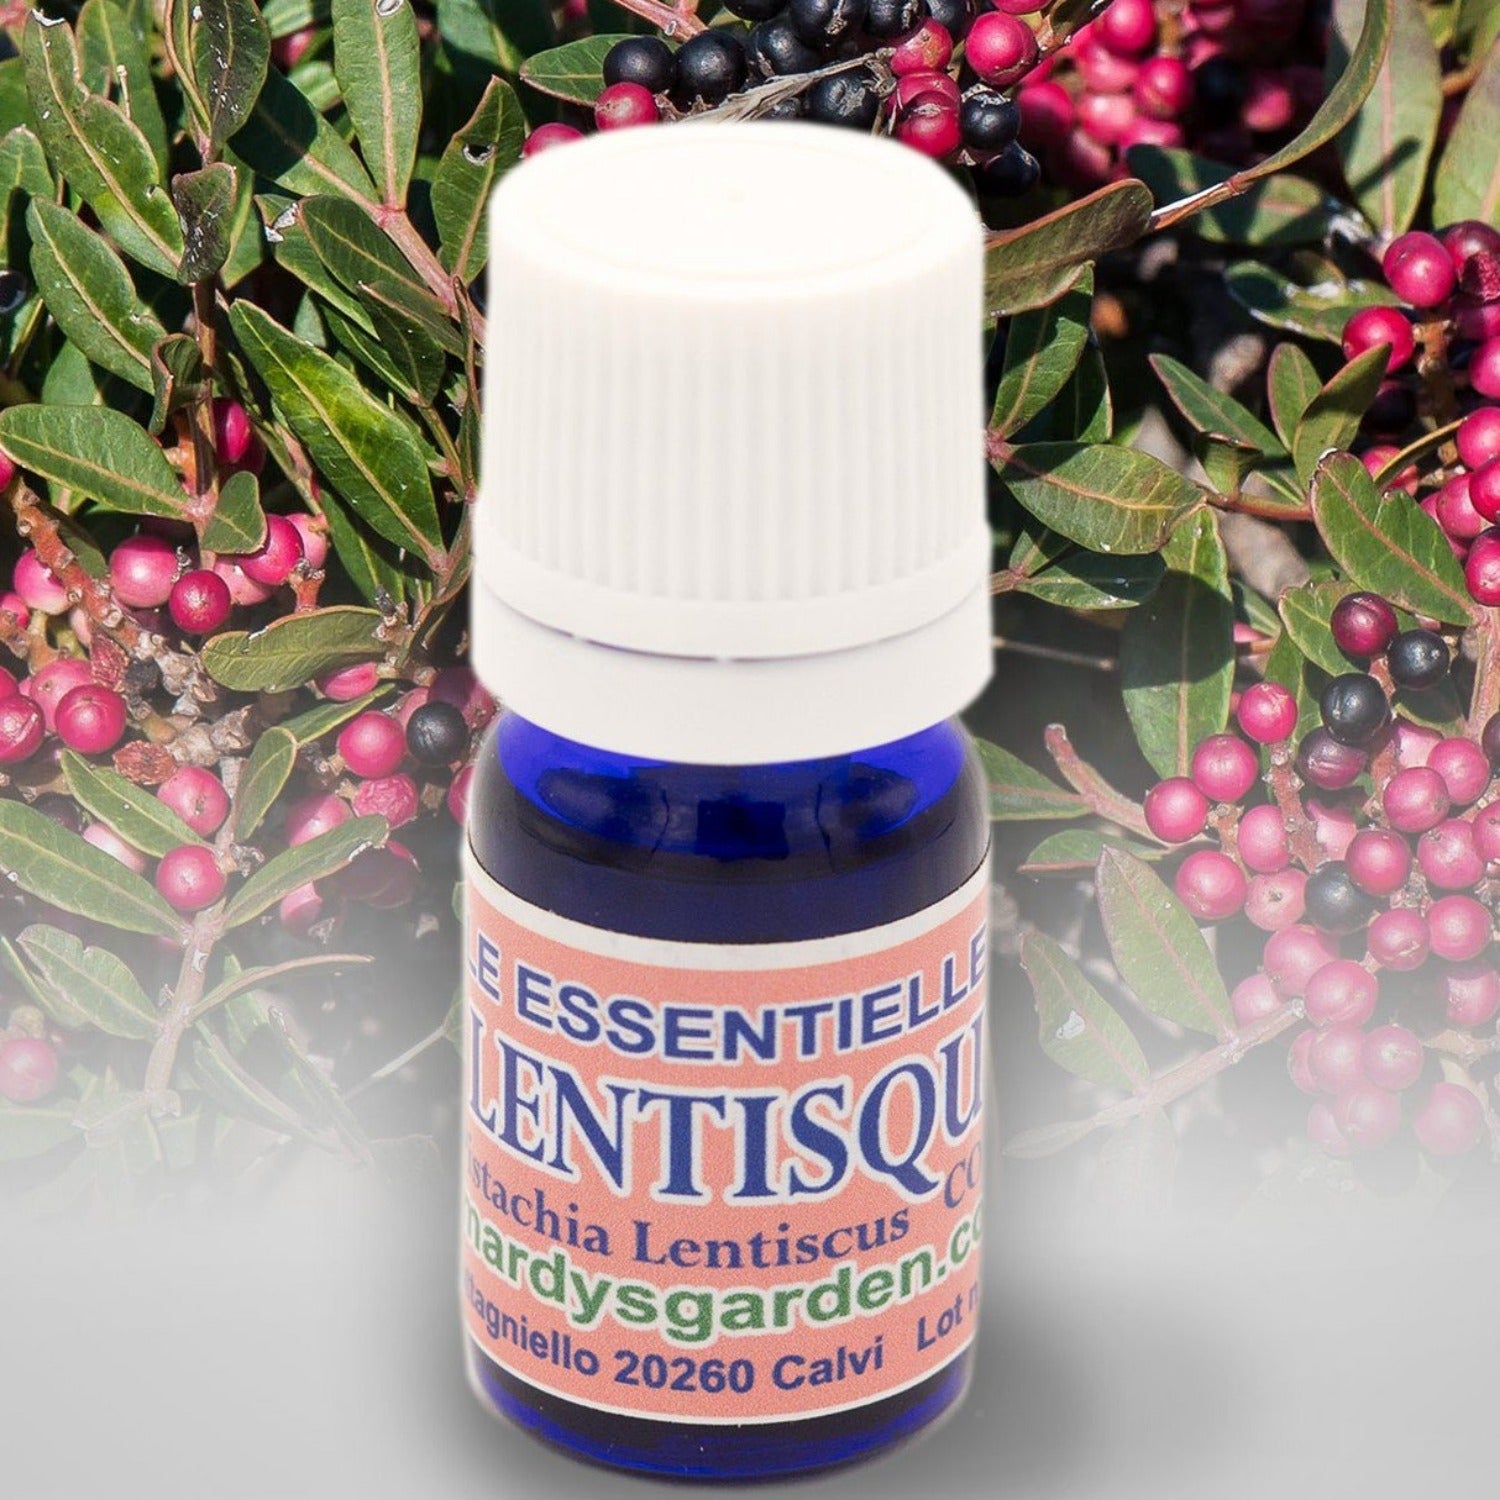 Mastic Essential Oil 5ml. Organic Essential Oil from Corsica. Pistacia Lentiscus (Lentisk). 100% pure and natural, undiluted. Can be used on skin, aromatherapy